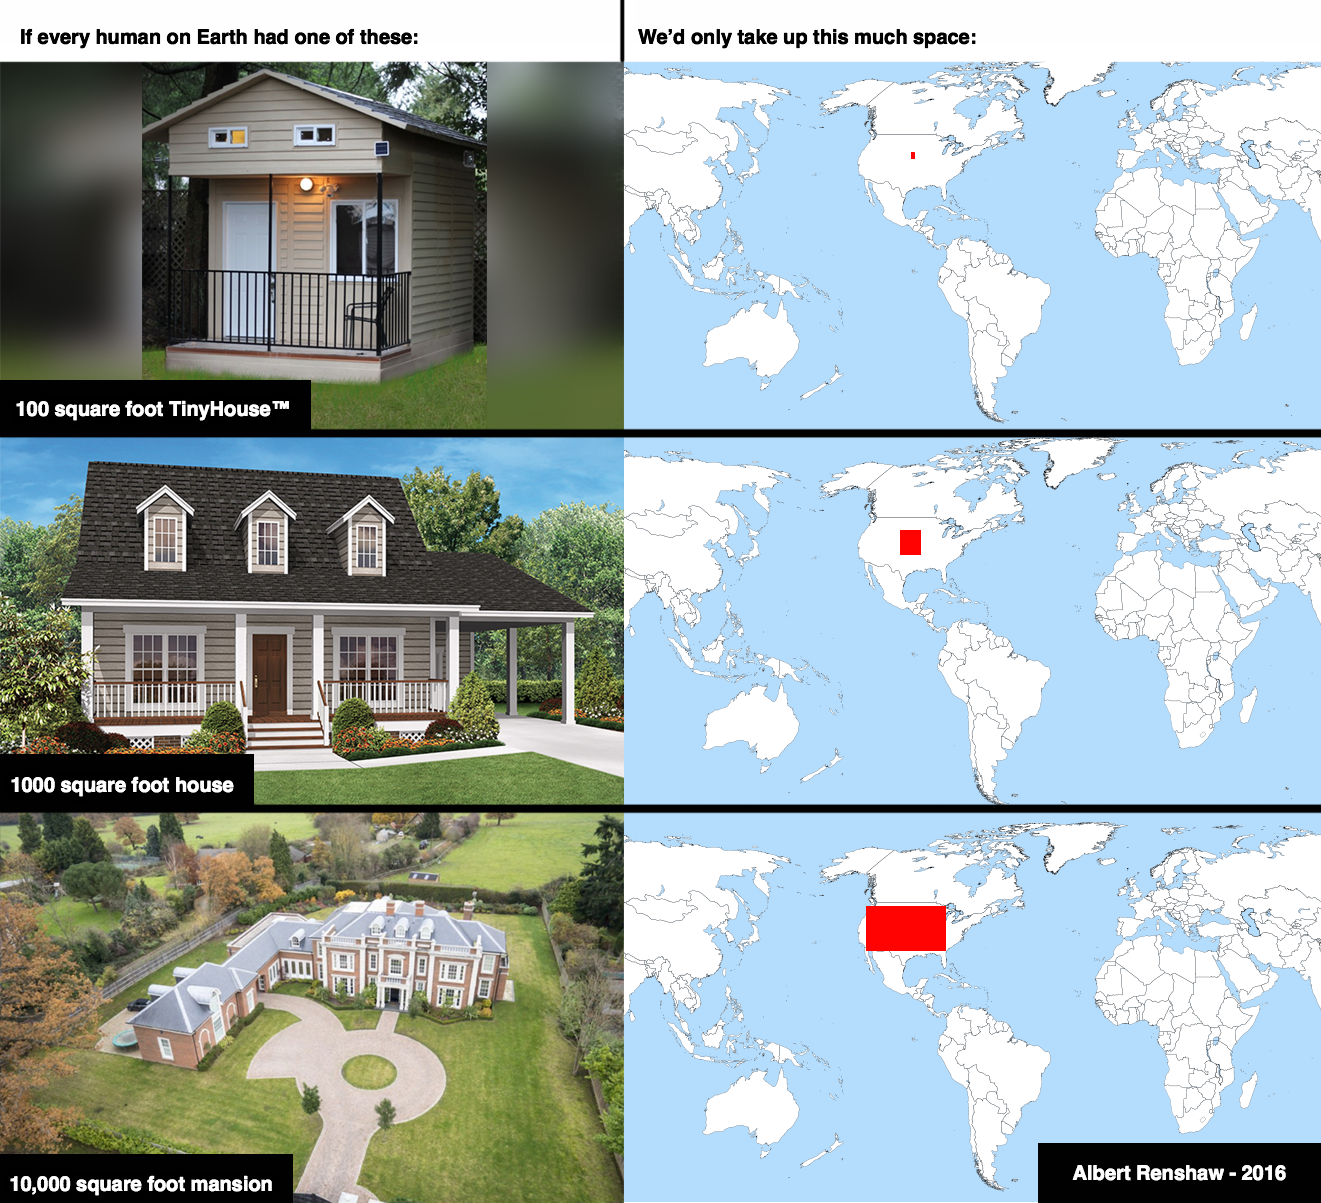 Area required to give every individual human (not family) on Earth their own Tiny House, House or Mansion 